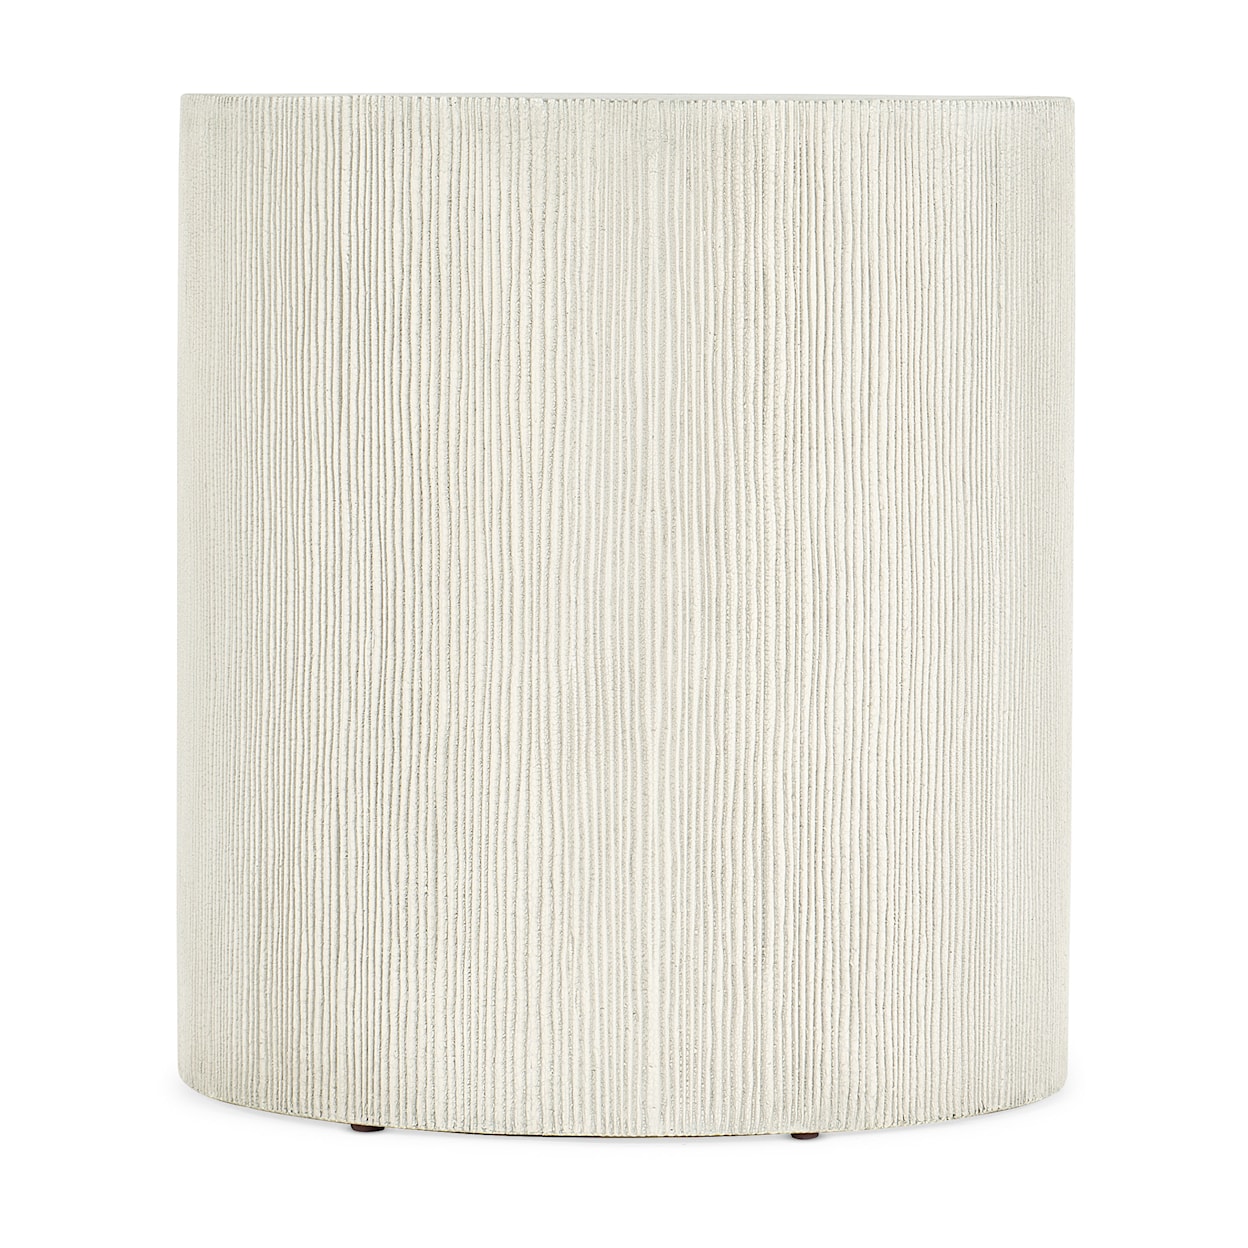 Hooker Furniture Serenity Round Side Table